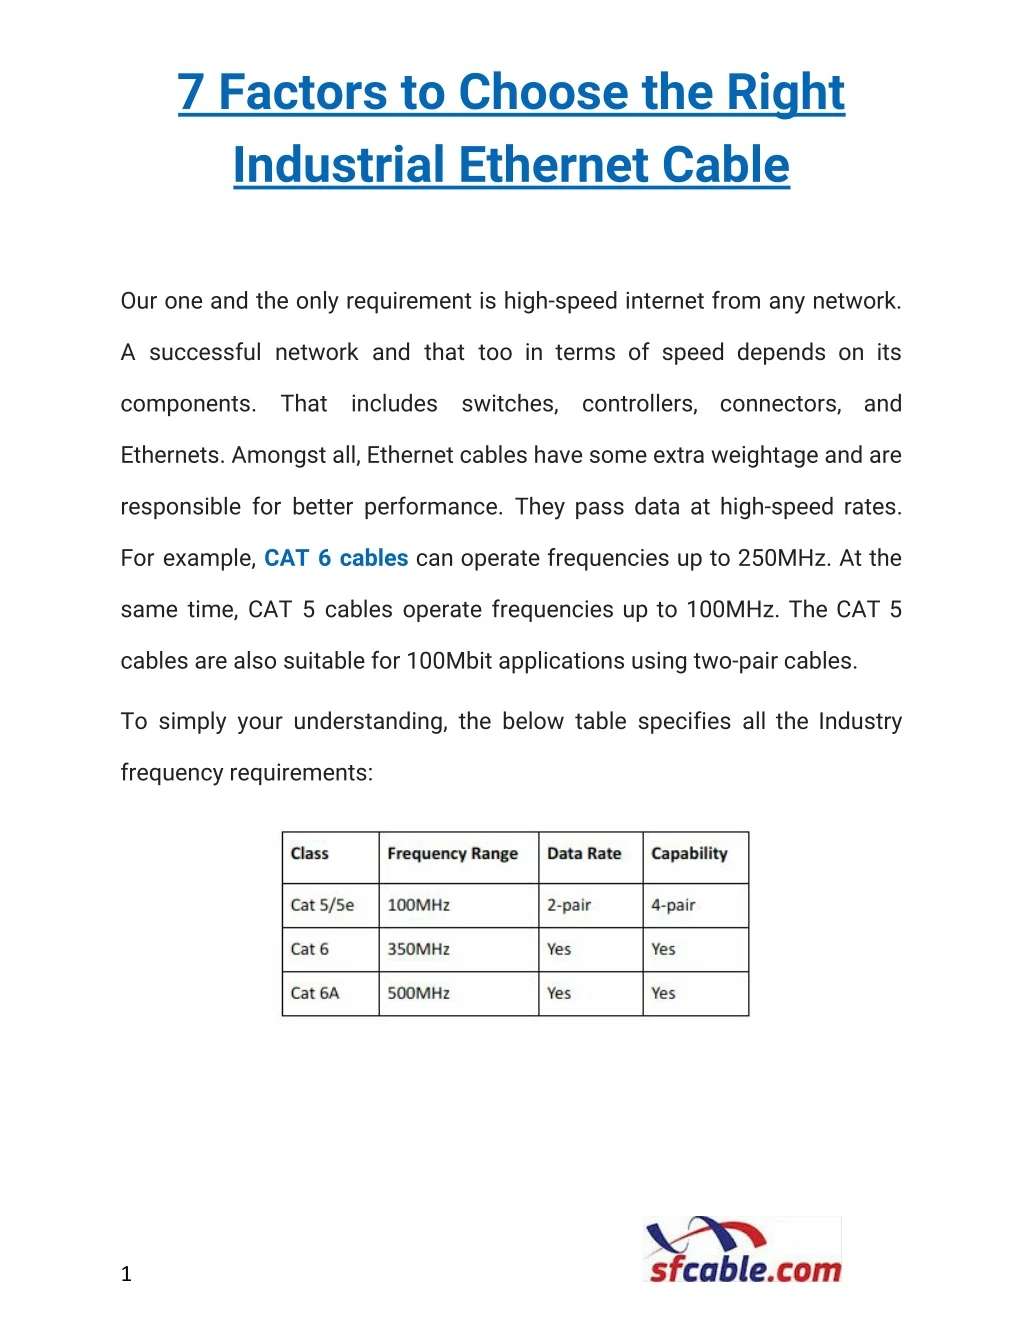 7 factors to choose the right industrial ethernet